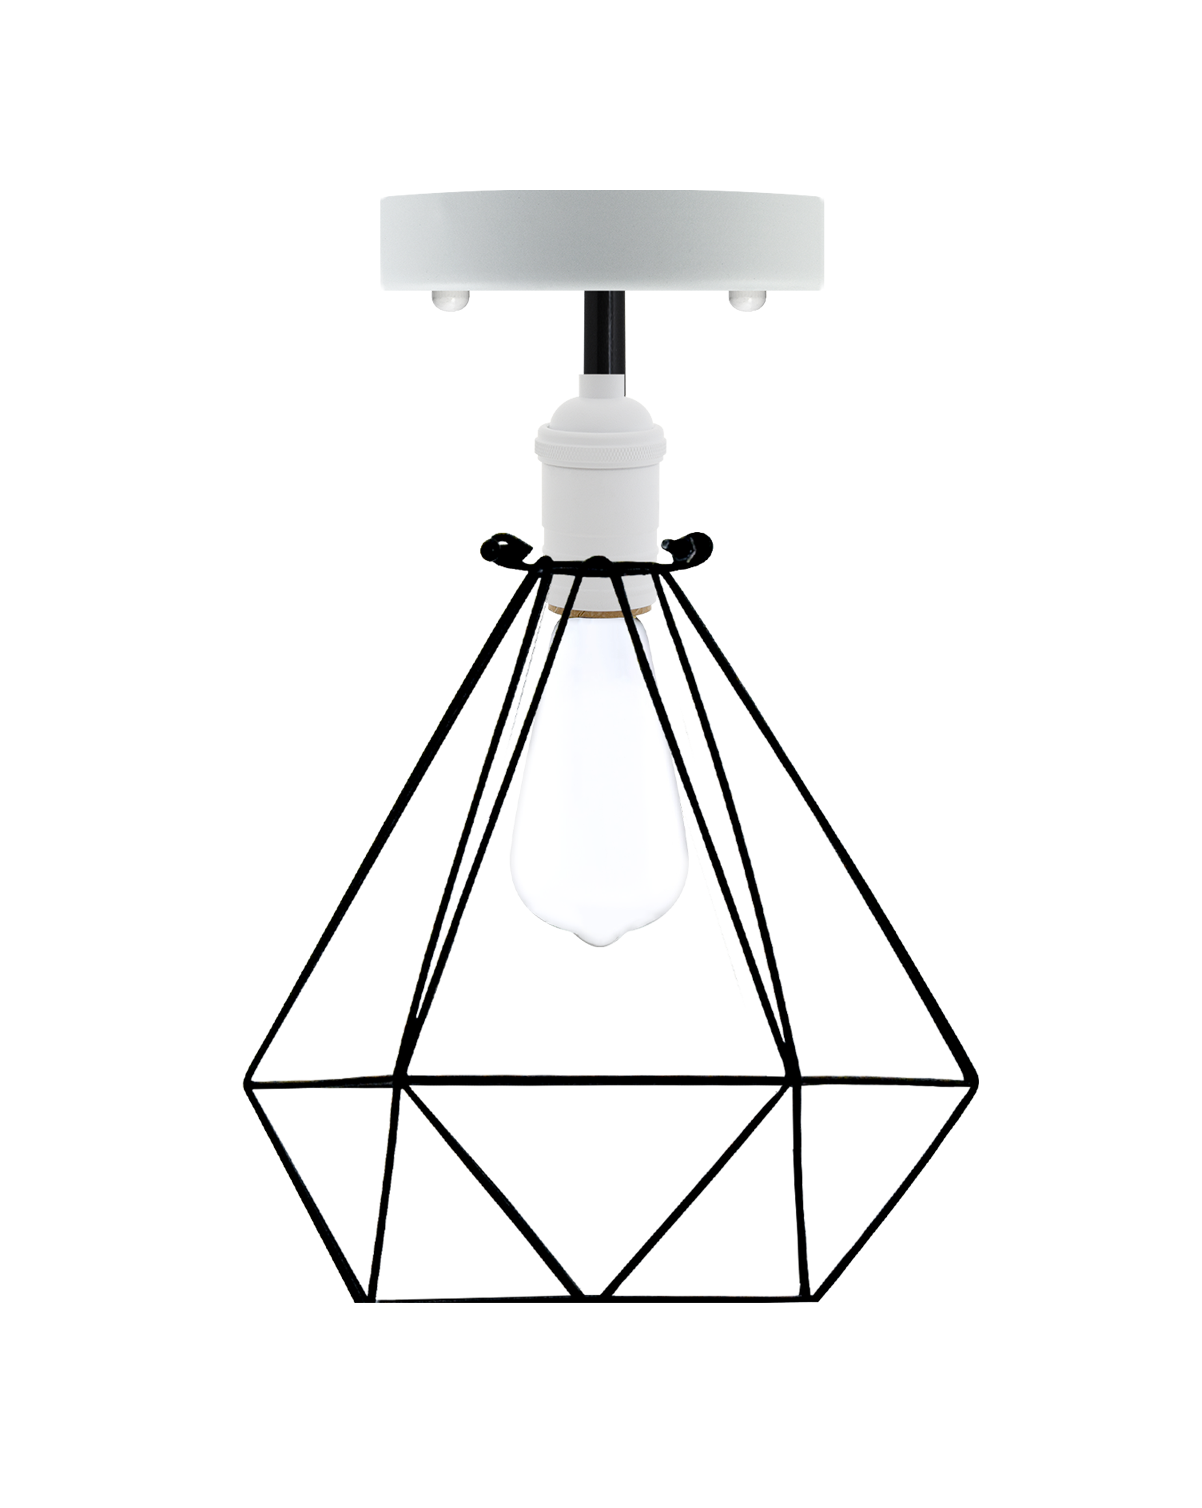 Semi-flush mount light fixture with a white base, black geometric metal cage, and an exposed white edison bulb.